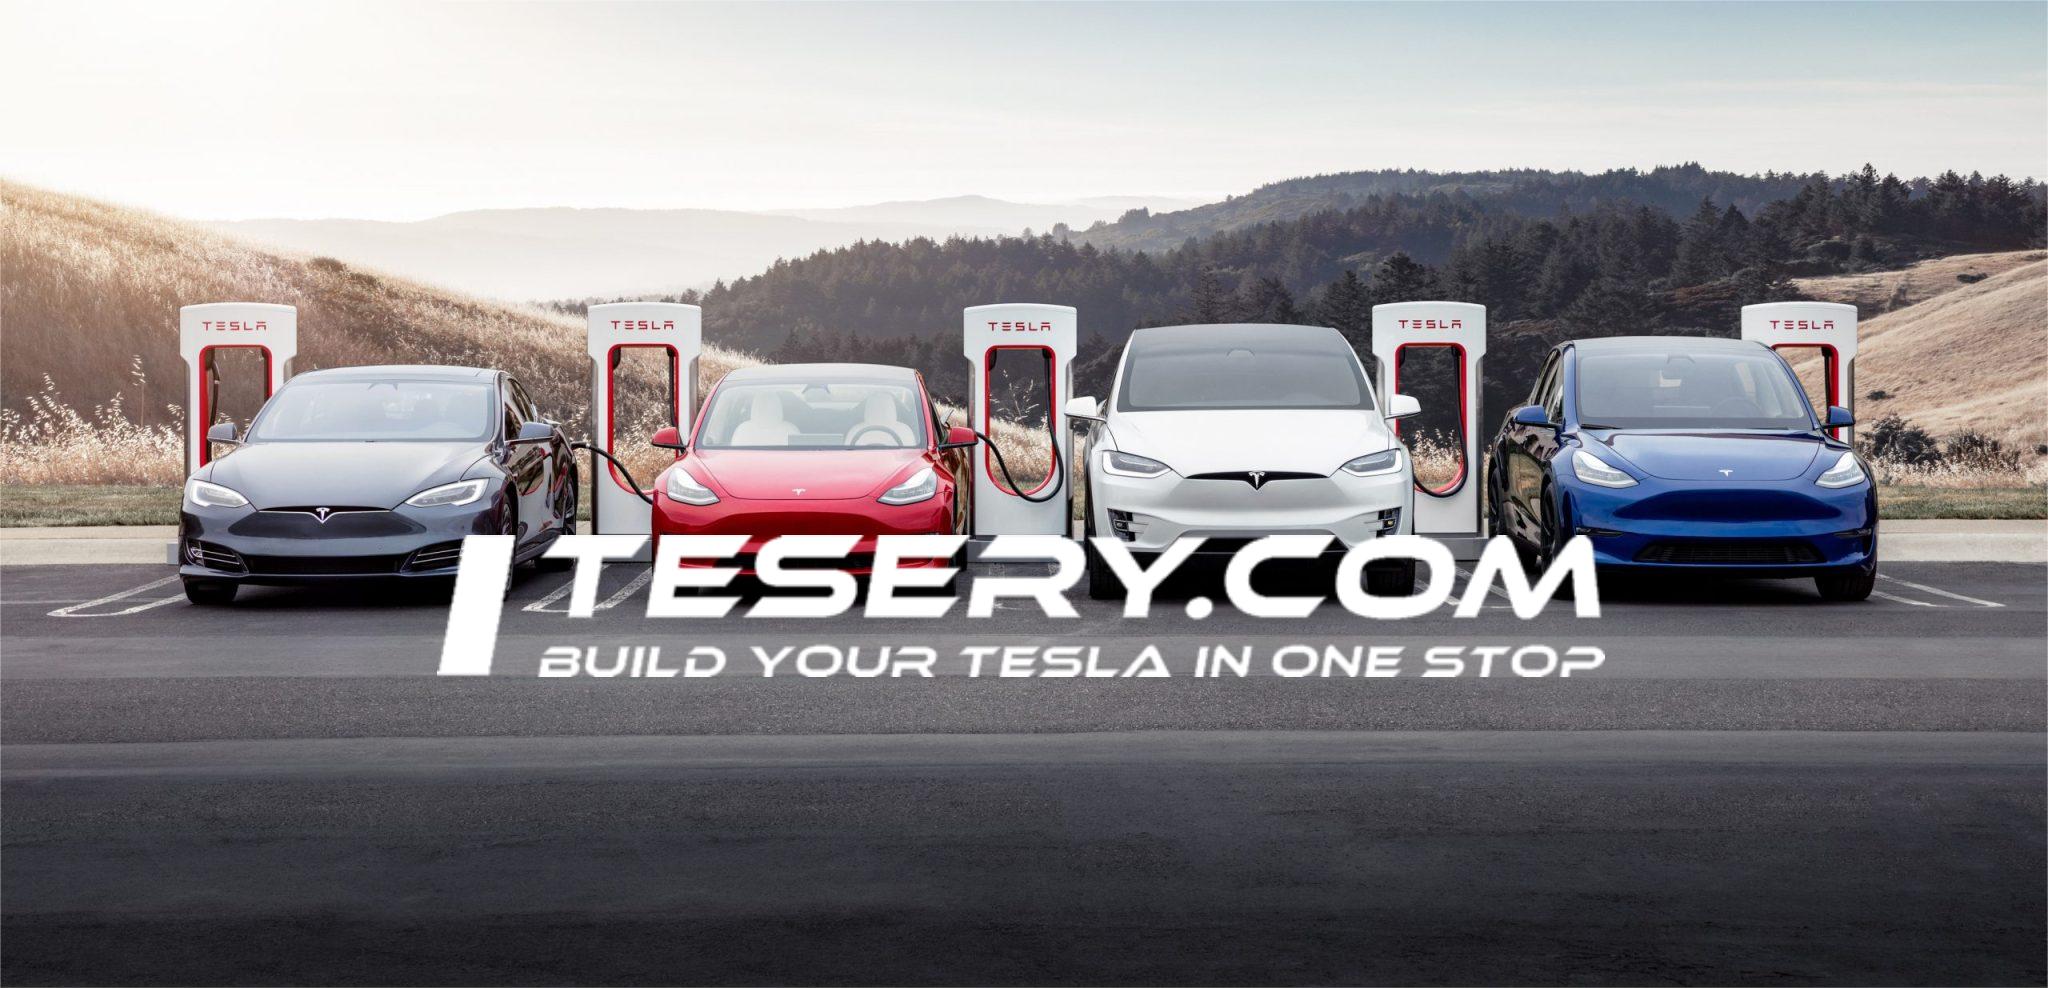 Used Tesla Vehicles Now Eligible for $4,000 Tax Credit Under Inflation Reduction Act - Tesery Official Store